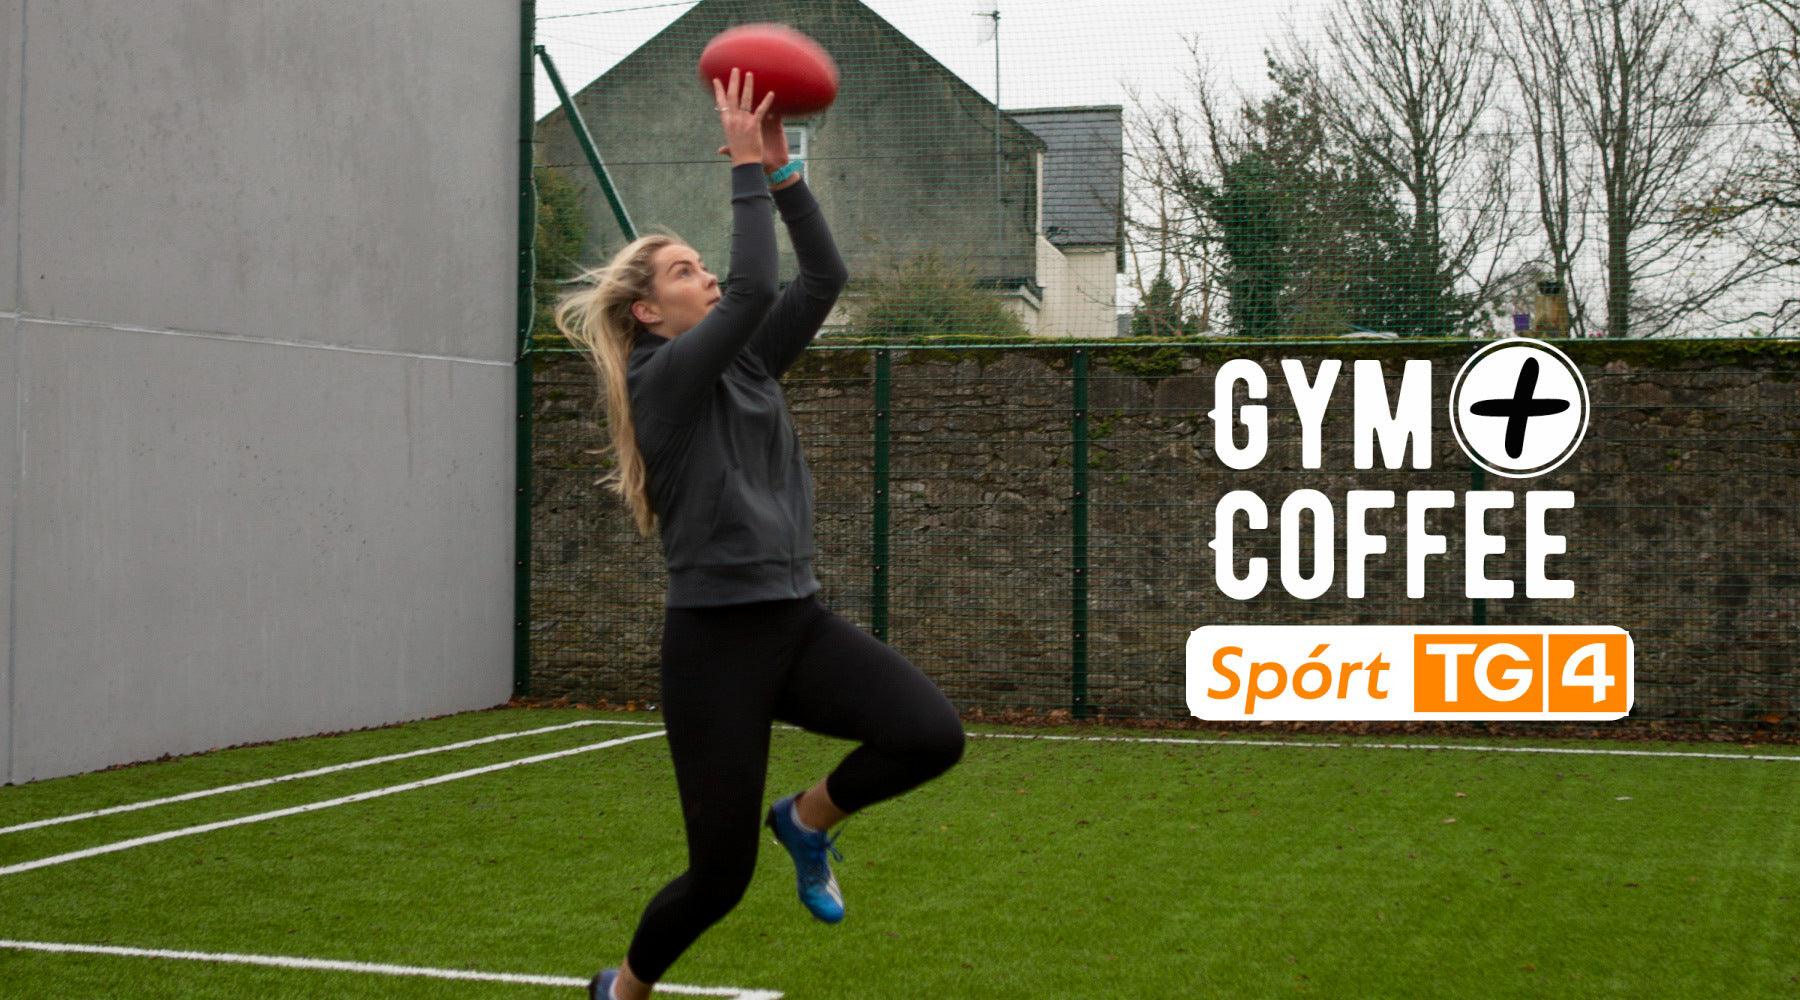 We’re sponsoring the AFLW on TG4! - Gym+Coffee USA